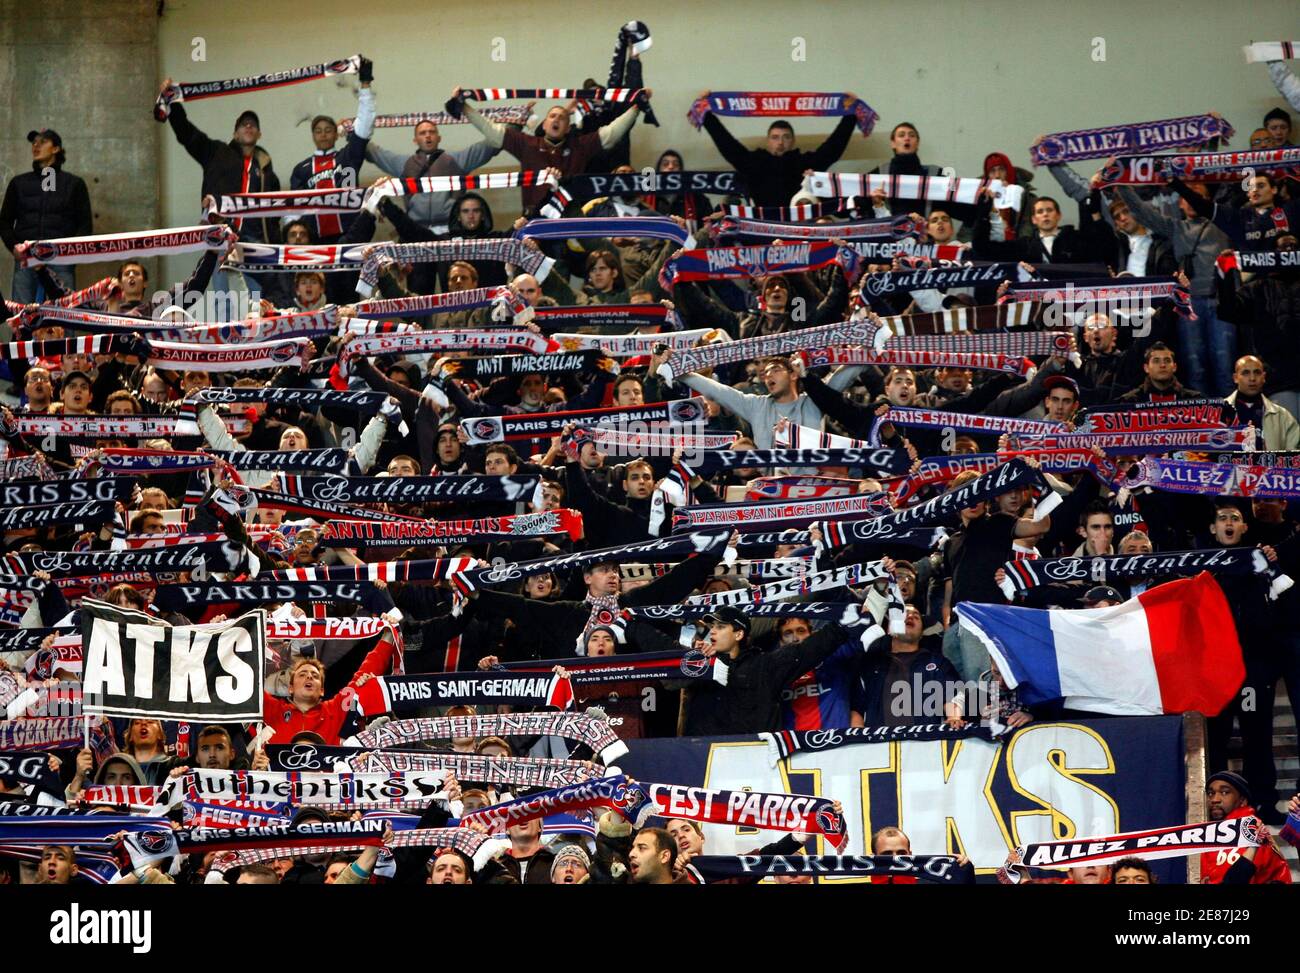 Paris St Germain's supporters cheer their team as PSG faces host Greek side  Panathinaikos in a Group G UEFA soccer match at Parc des Princes stadium in  Paris, December 13, 2006. The